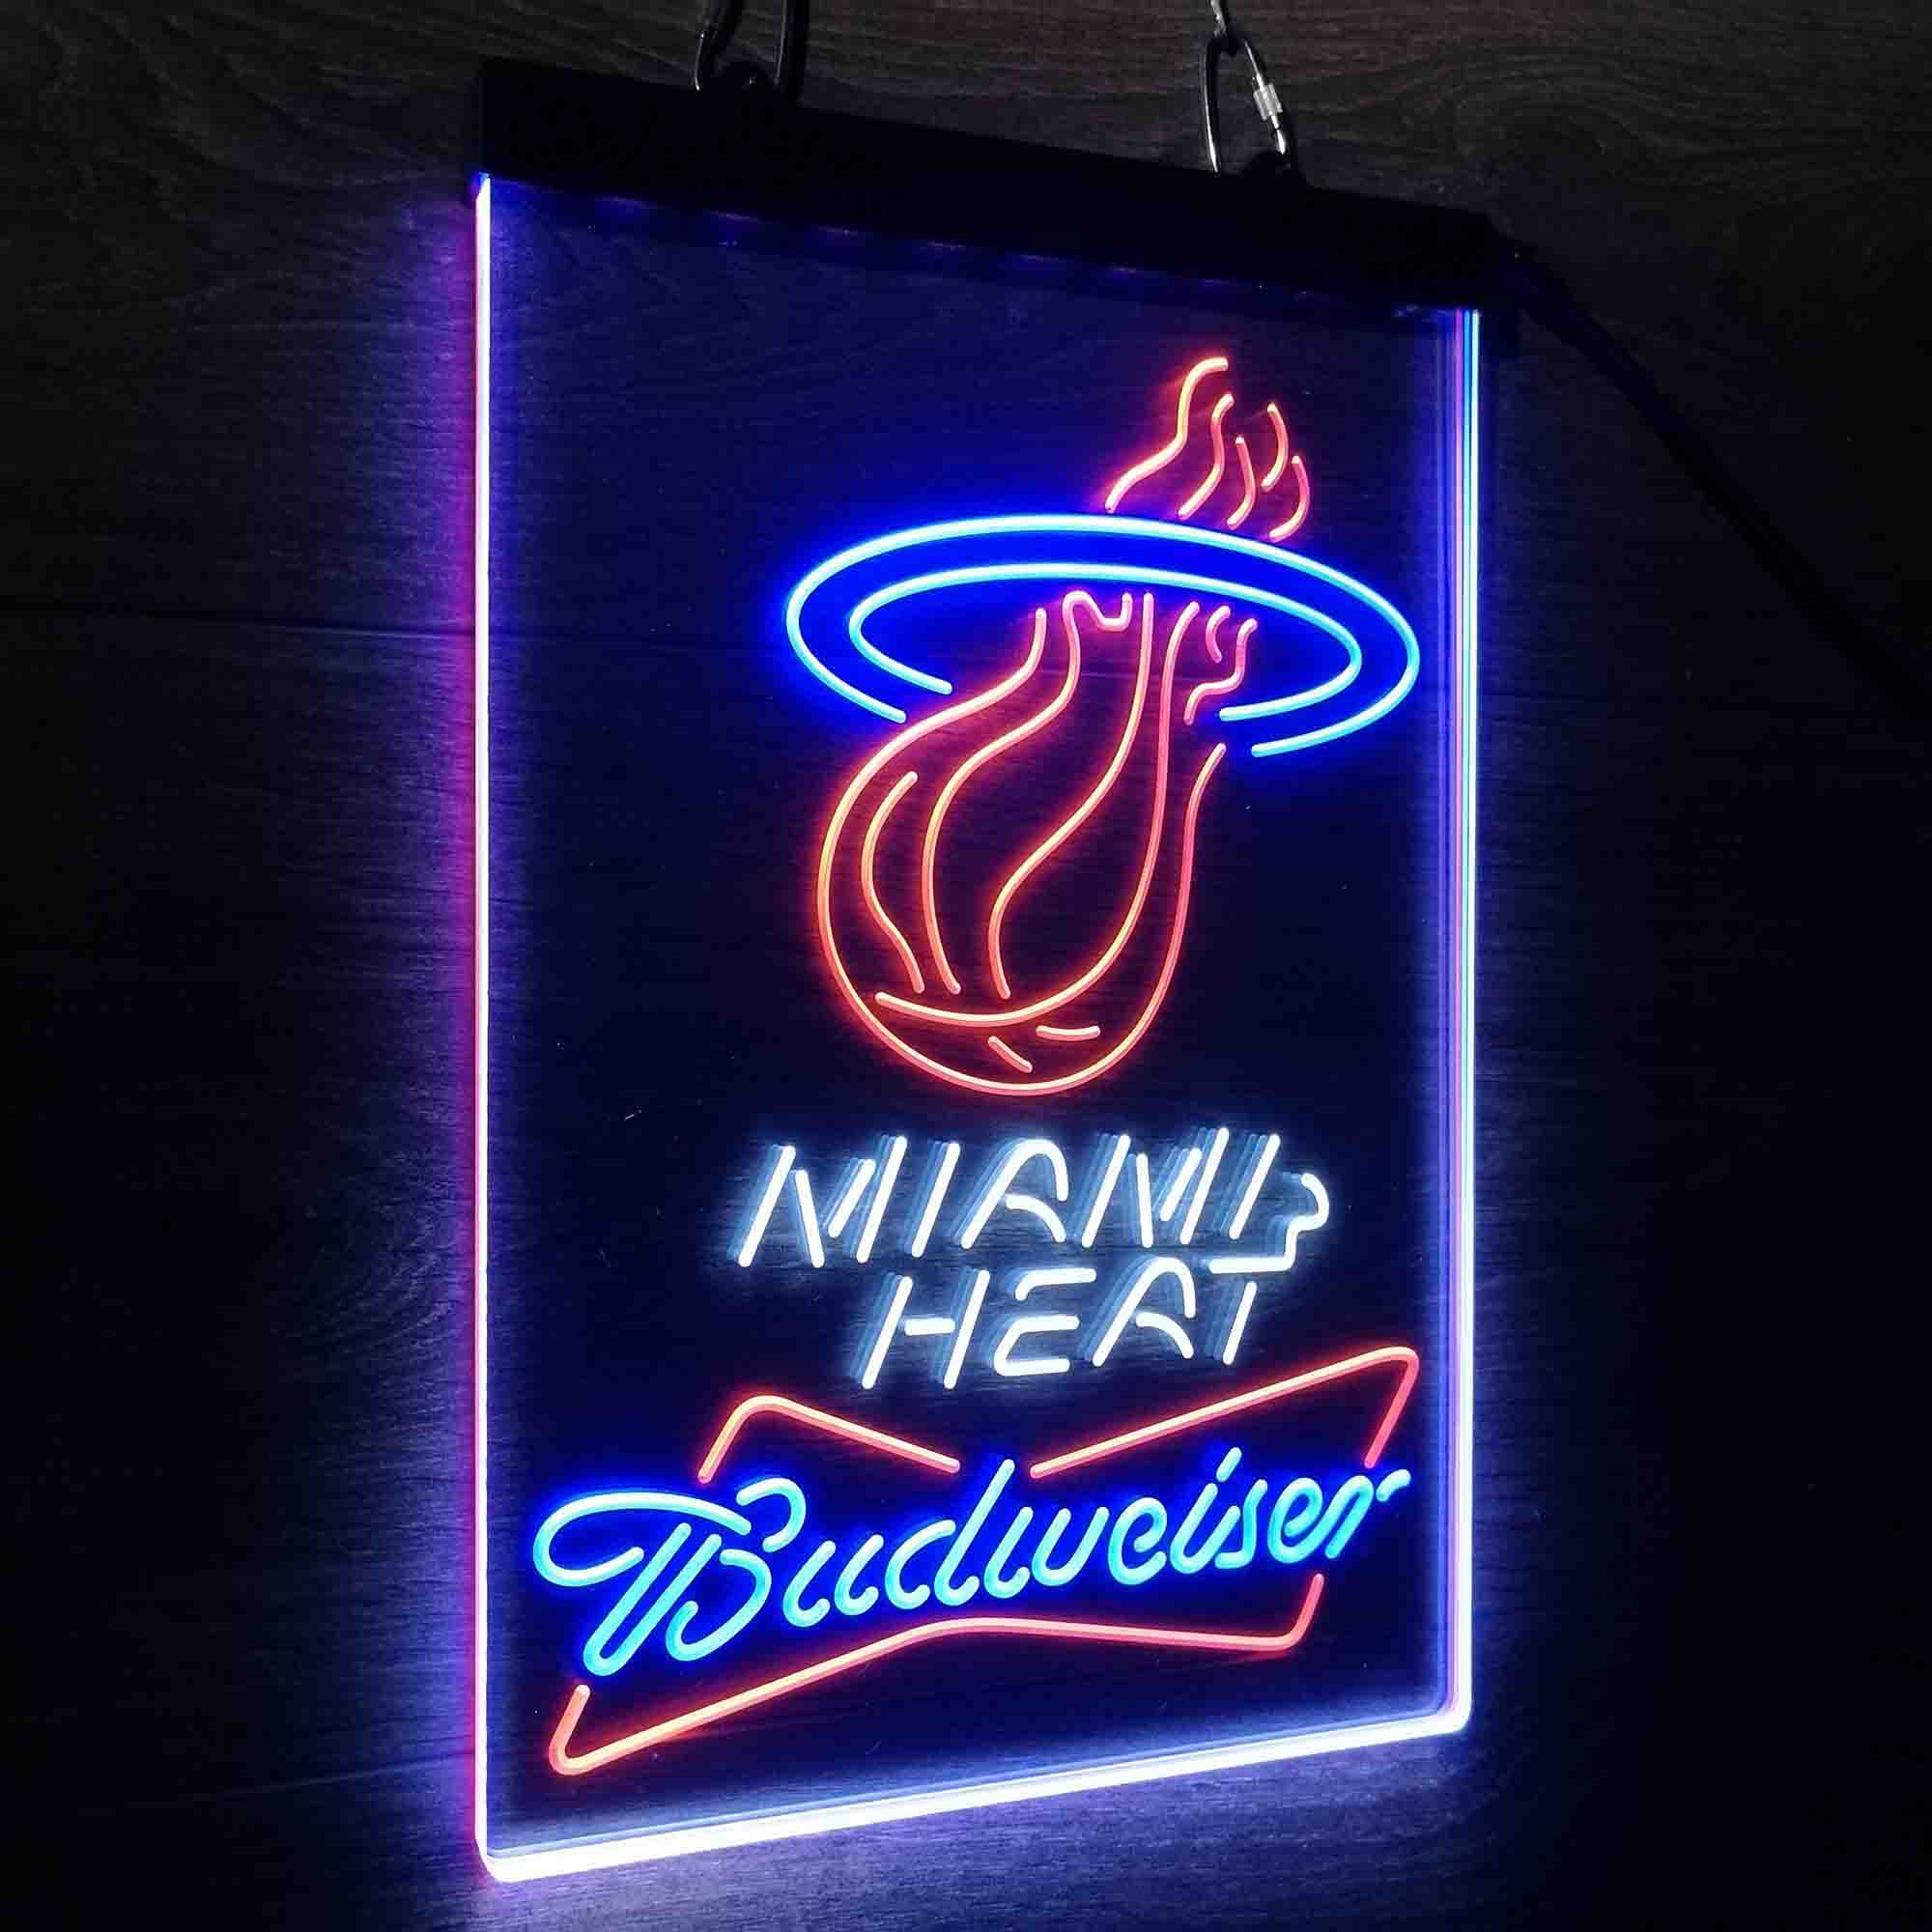 Miami Heat Nba Budweiser Neon LED Sign 3 Colors